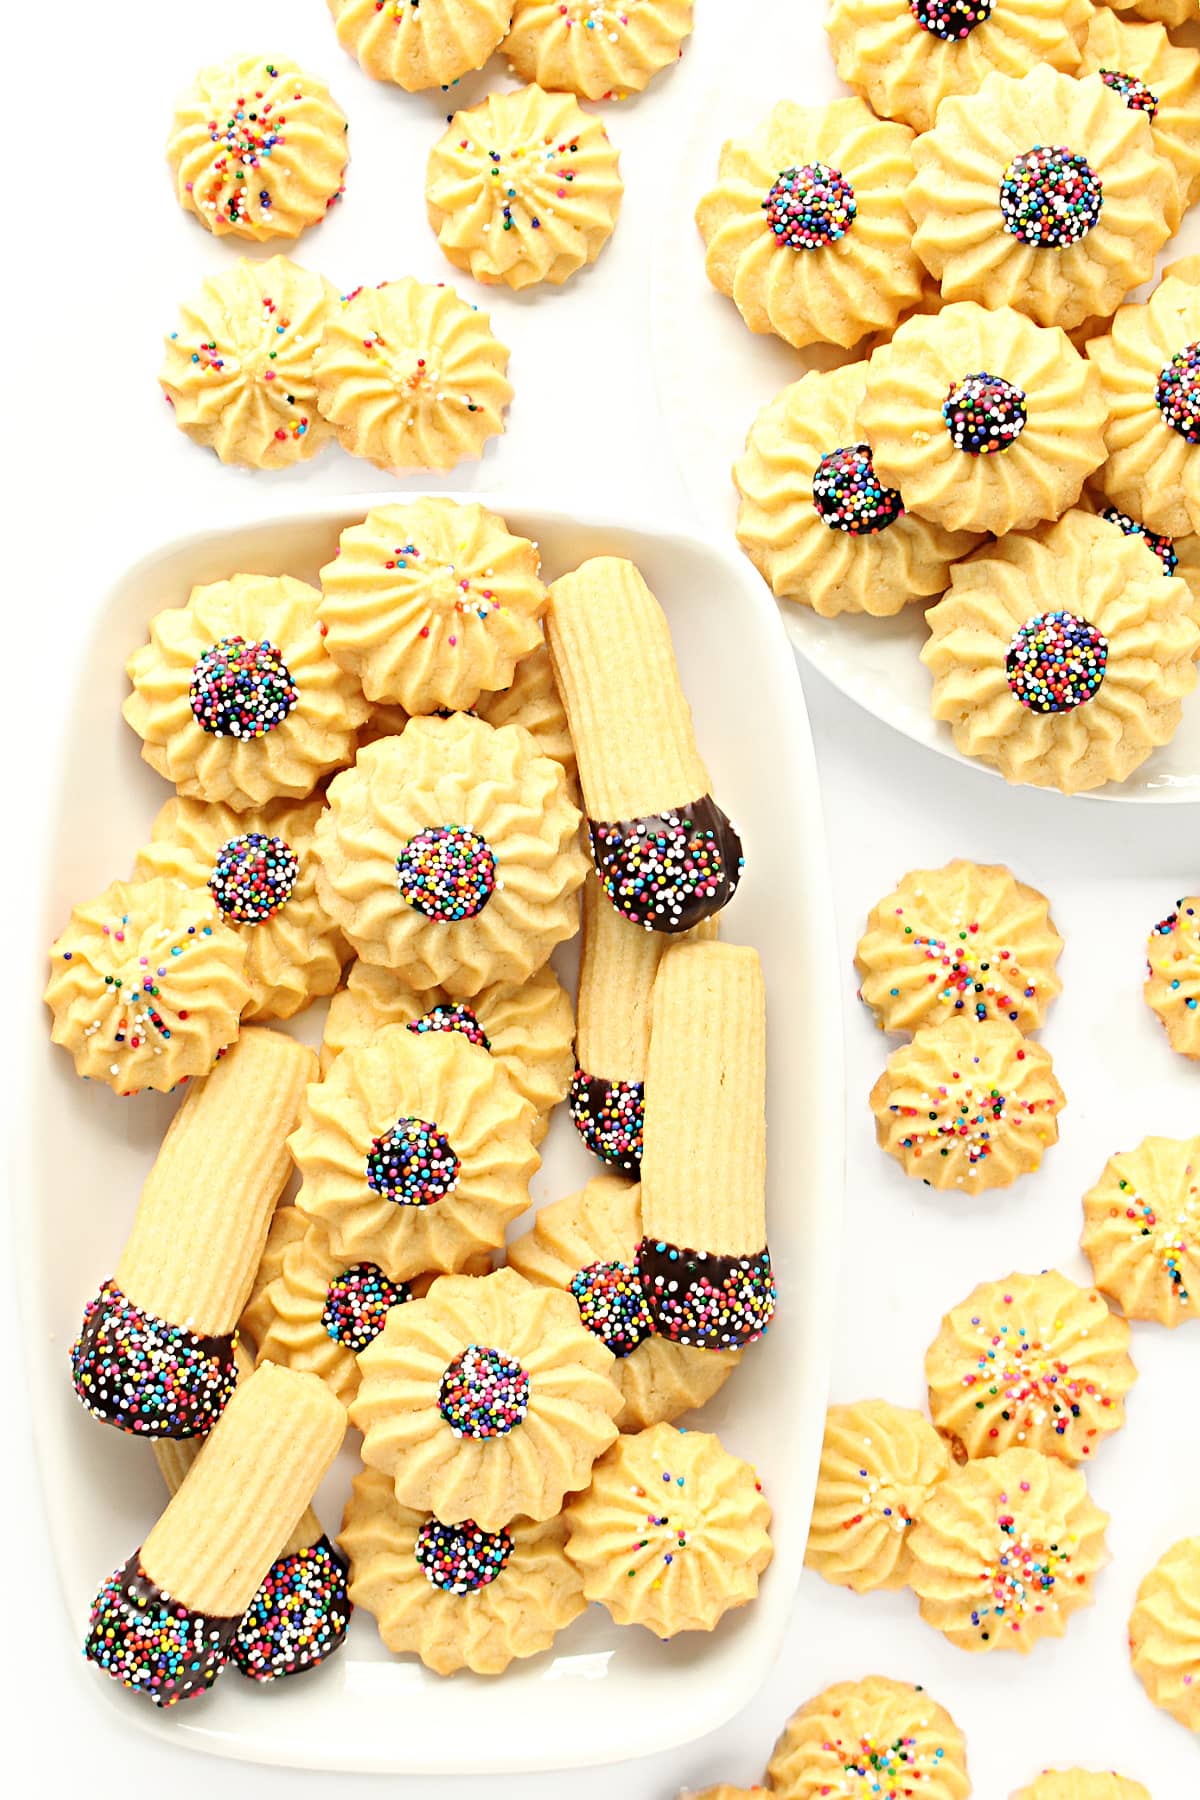 Piped butter cookies topped with multicolored nonpareil sprinkles.